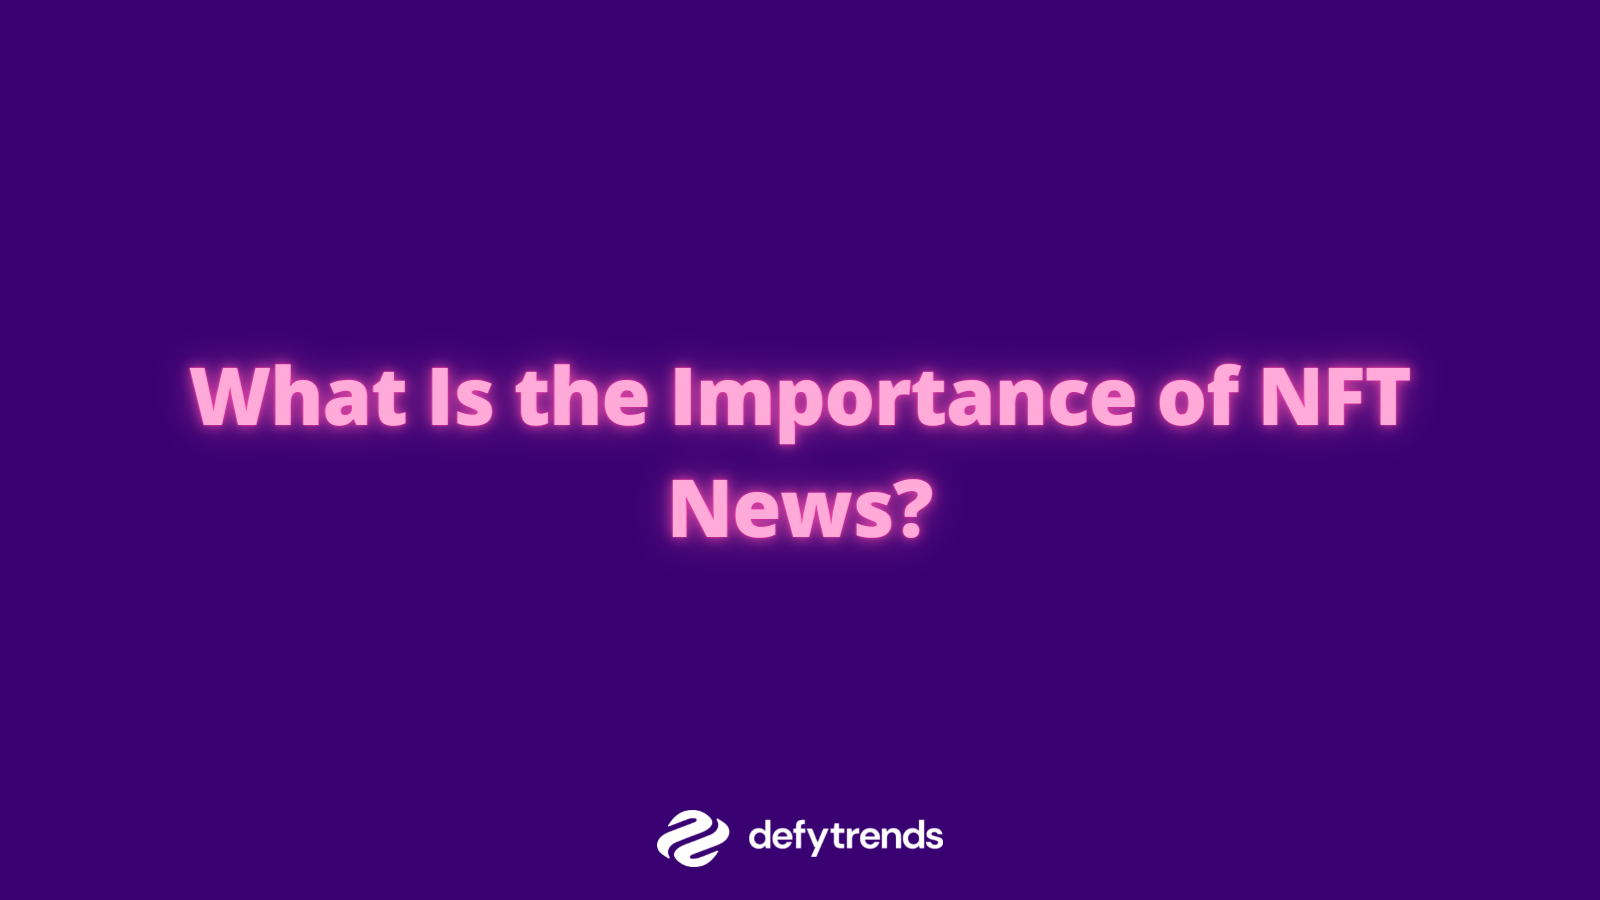 What Is the Importance of NFT News?